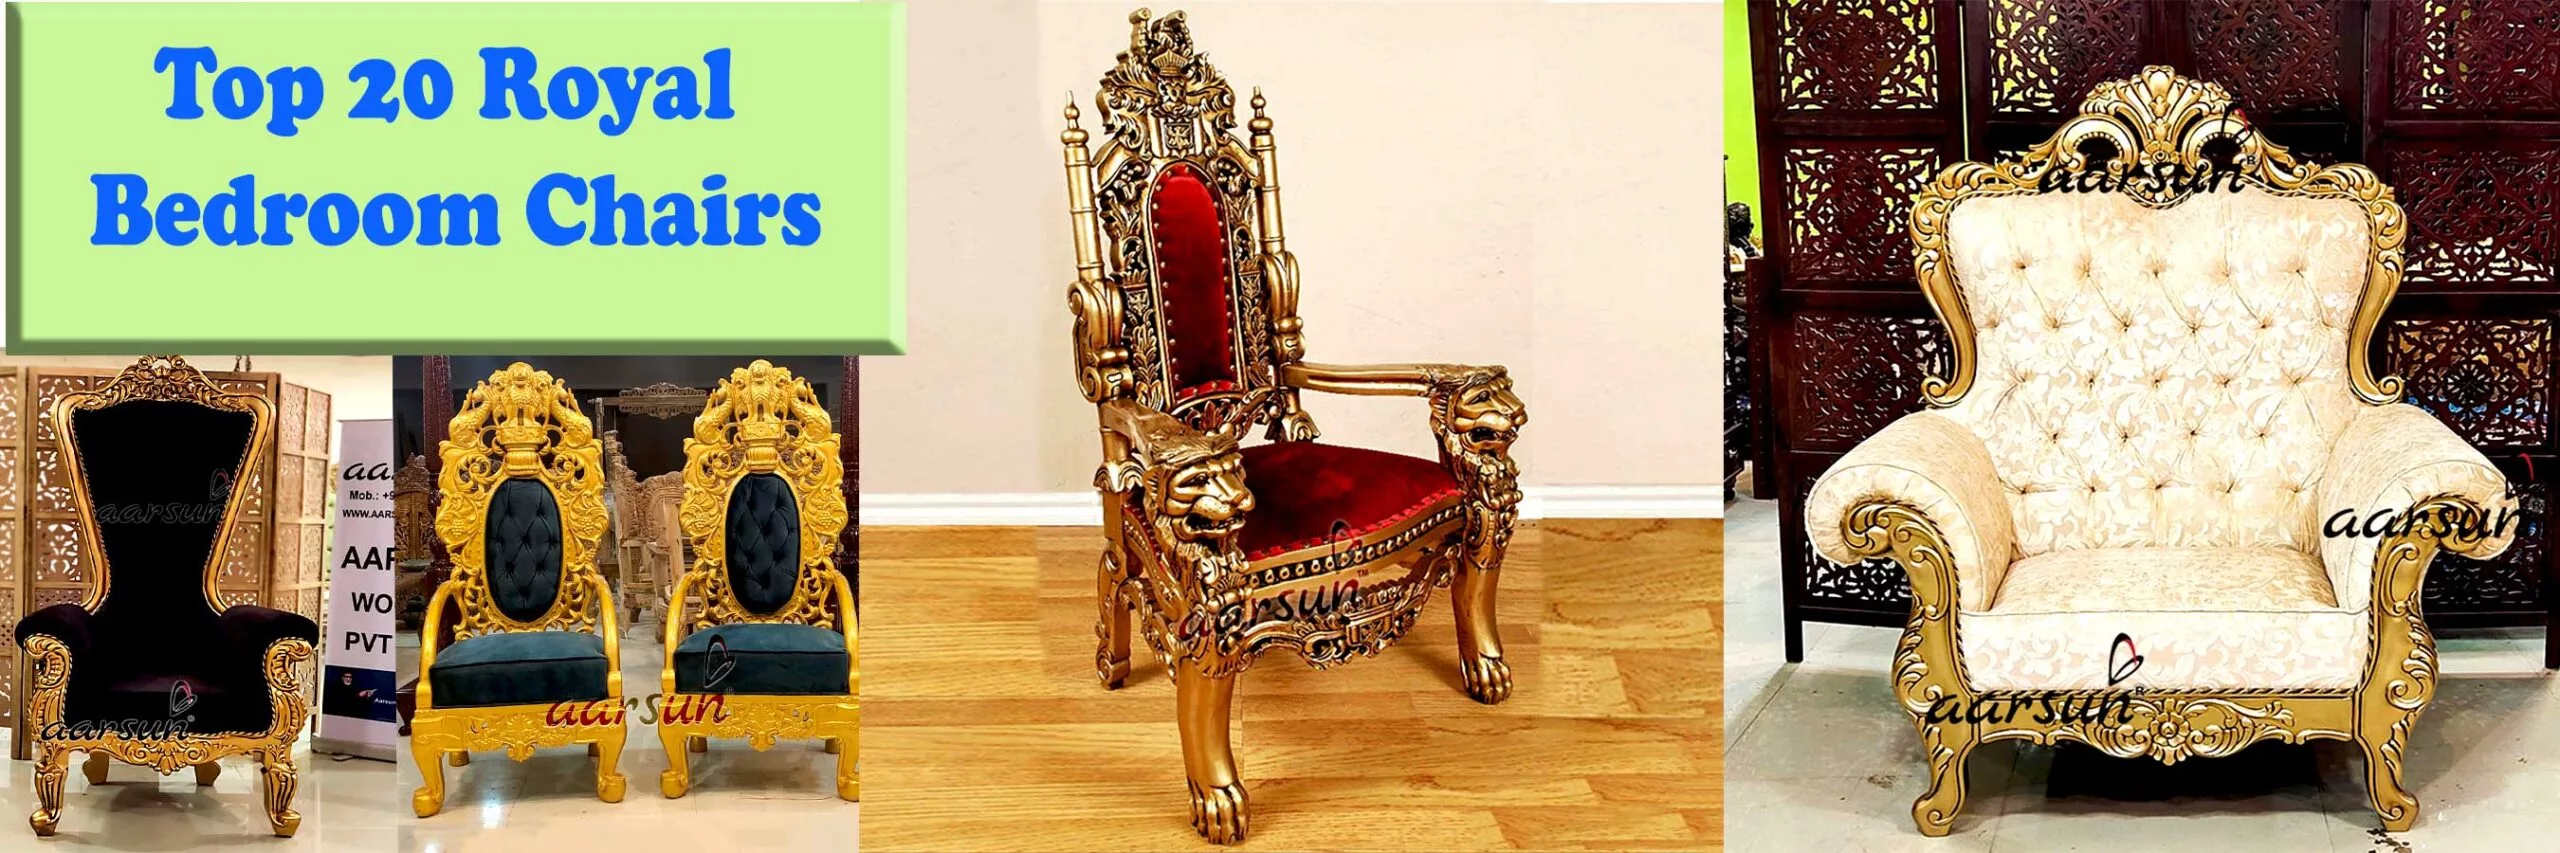 Top 20 Royal Bedroom Chairs